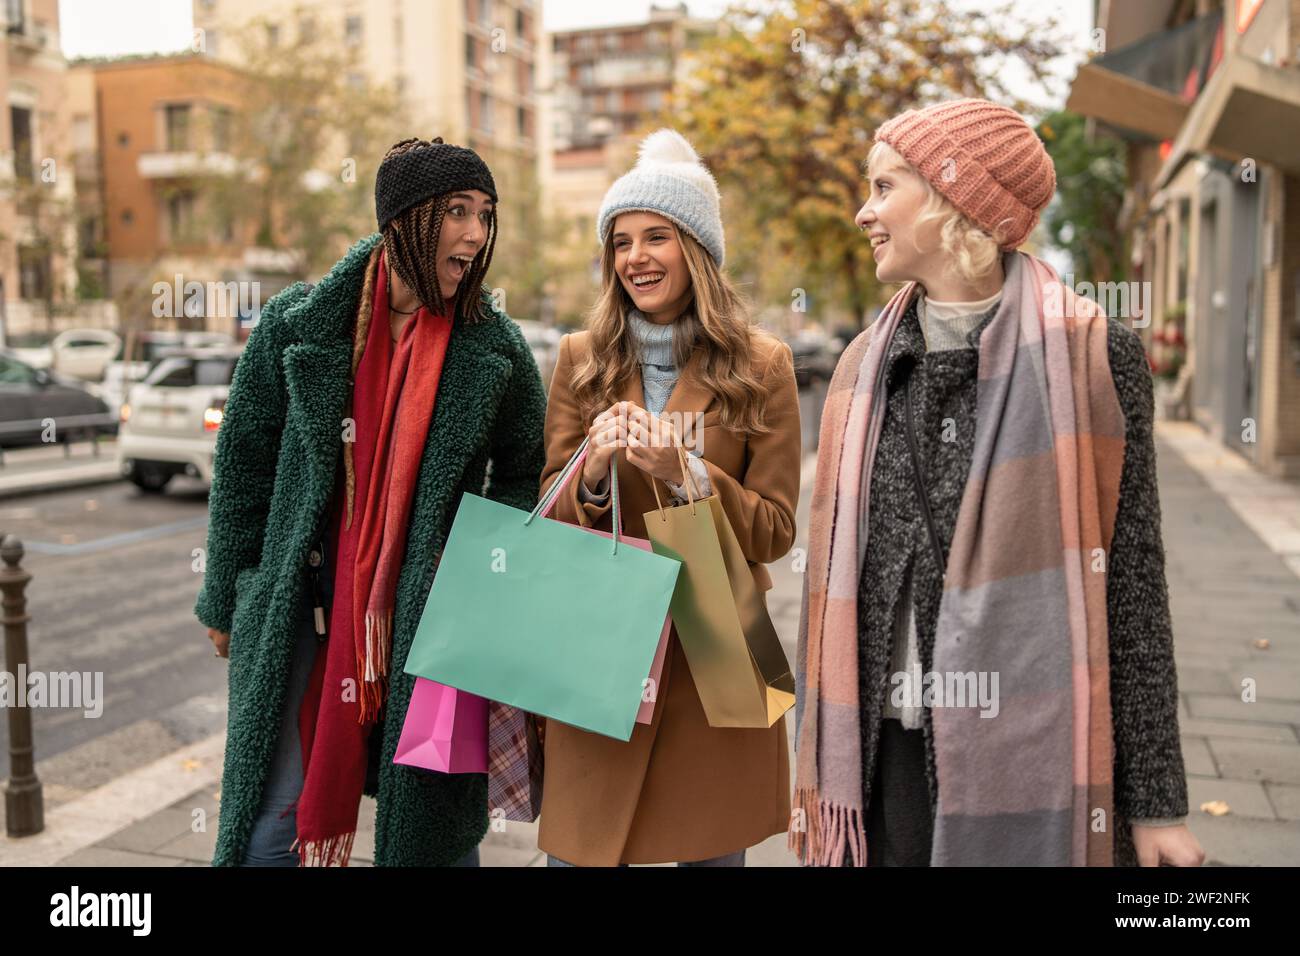 Three young women stroll through city streets, smiling and chatting happily with numerous colorful shopping bags in hand, immersed in the vibrant autu Stock Photo